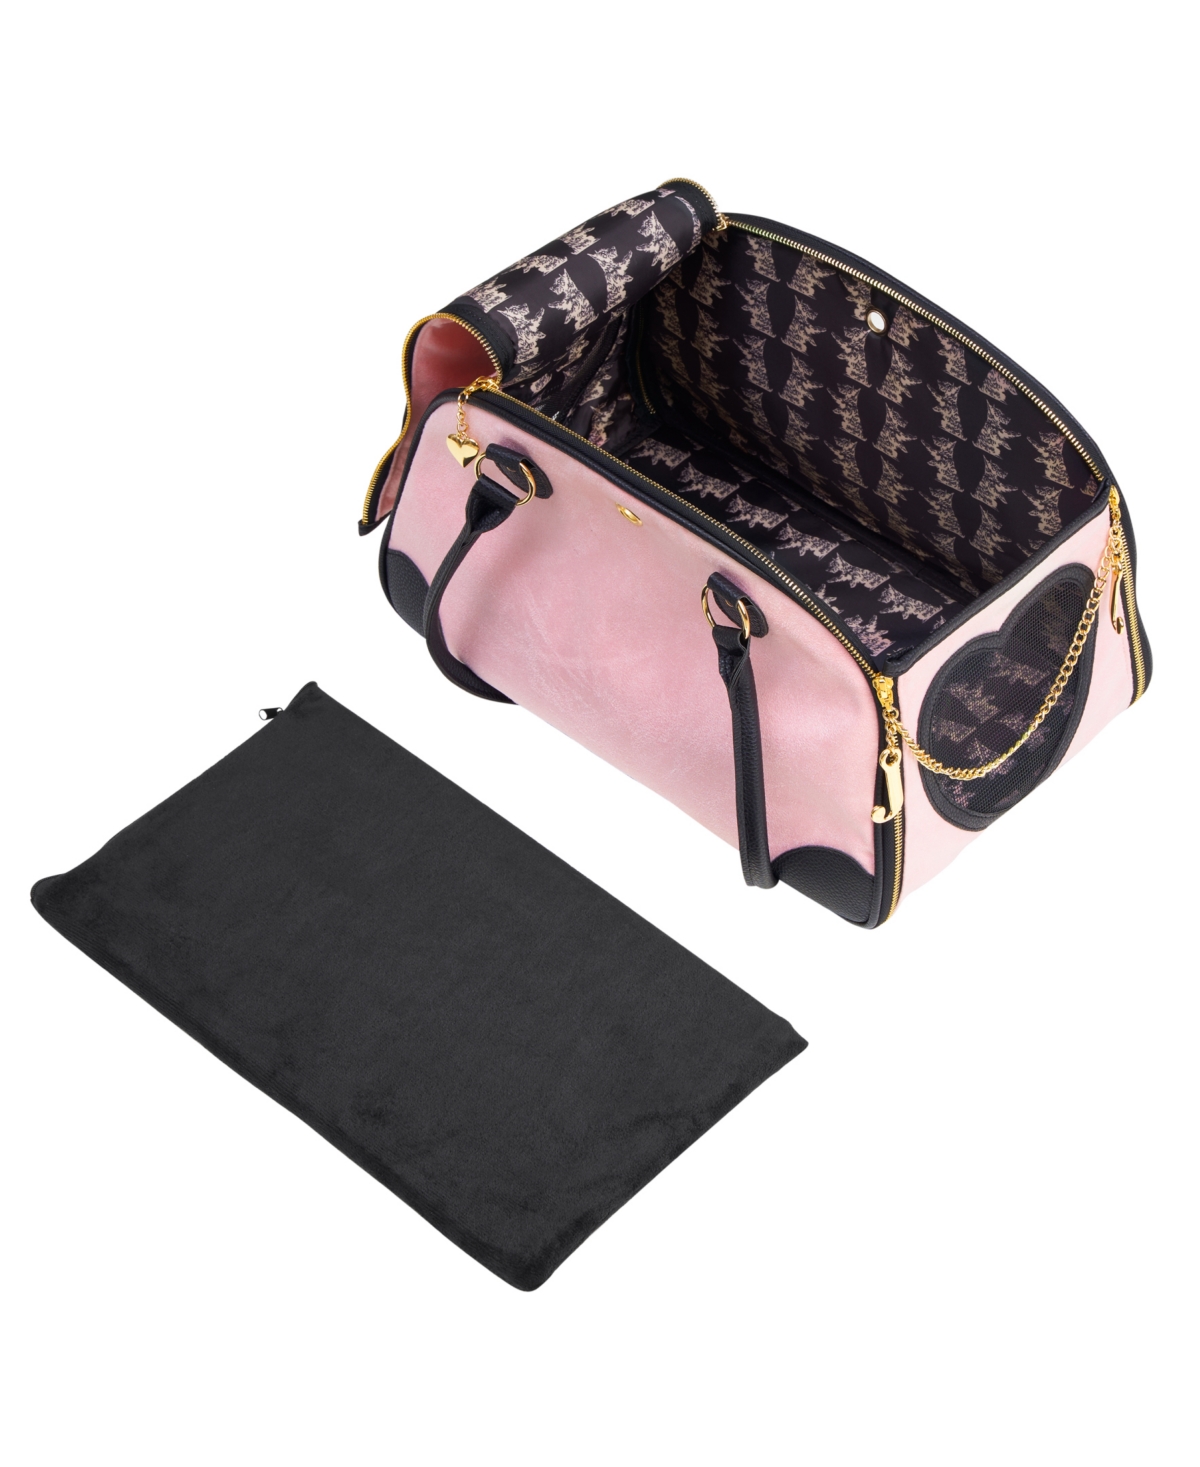 Give Me Treats Pet Carrier Stylish Travel Bag for Small Dogs and Cats - Pink